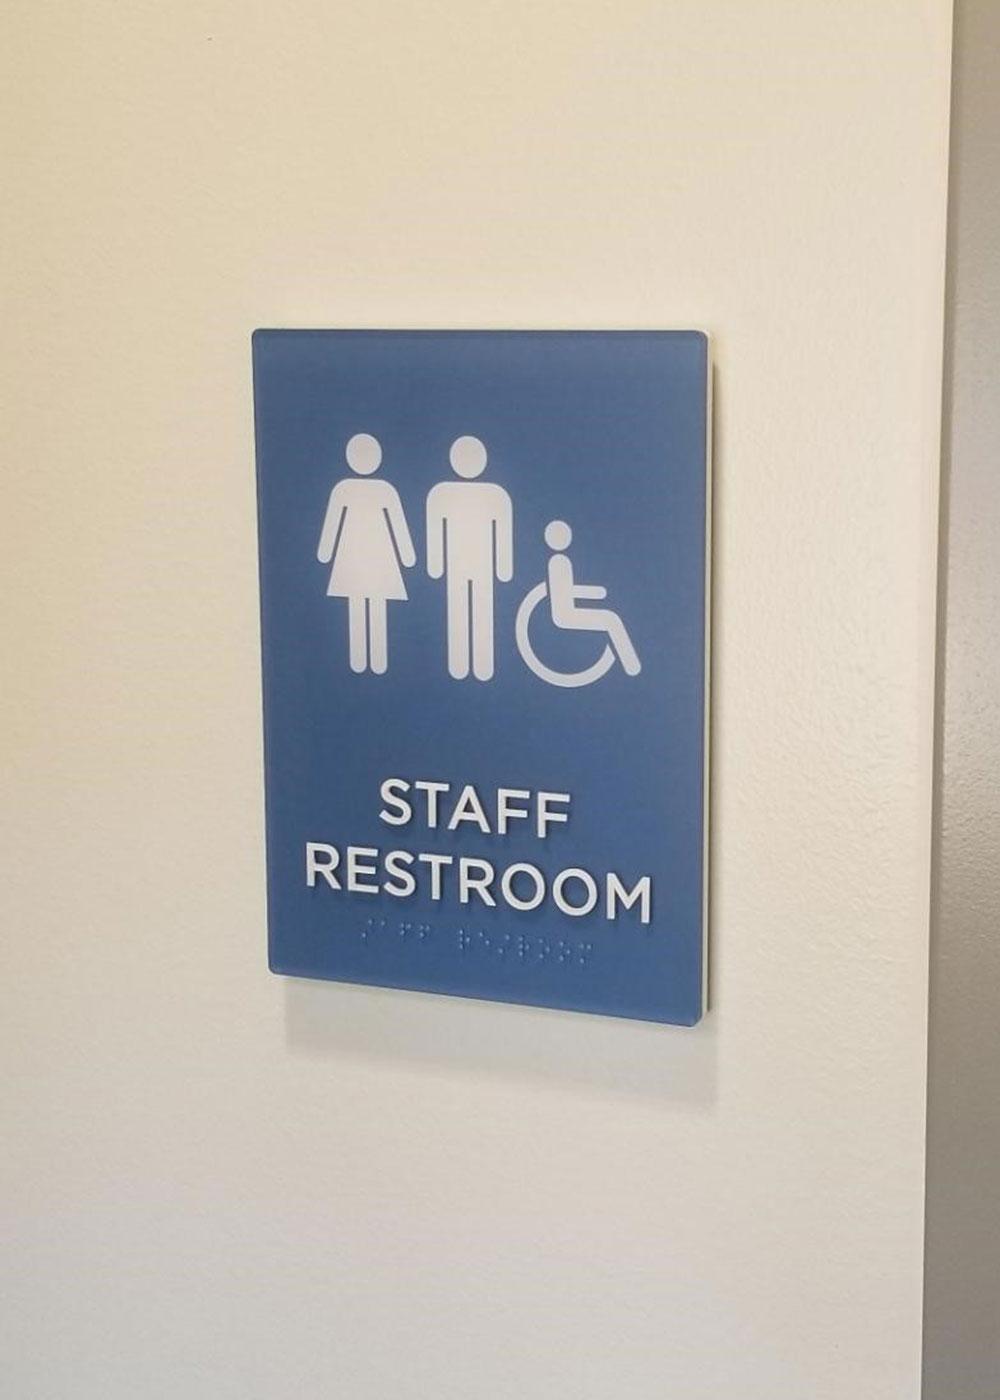 The interior sign package features ADA tactile and braille pieces.